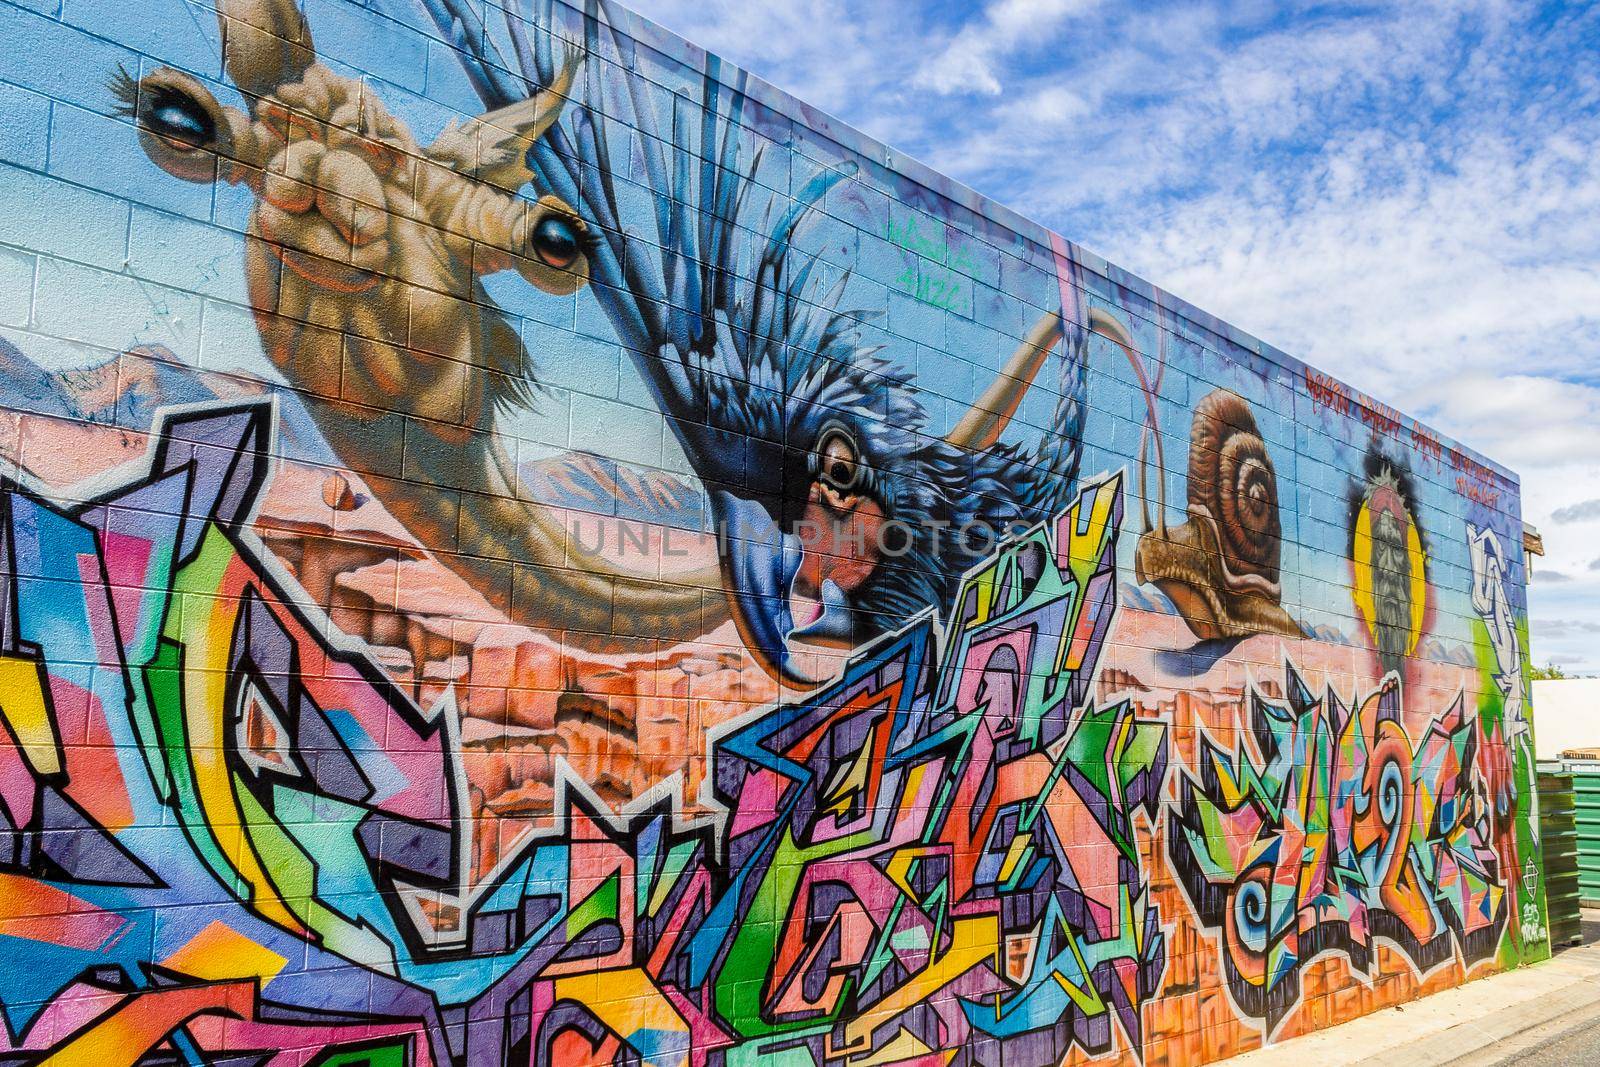 Alice Springs - 2015, April 27: Street art by unidentified artist next to a shopping center in Alice